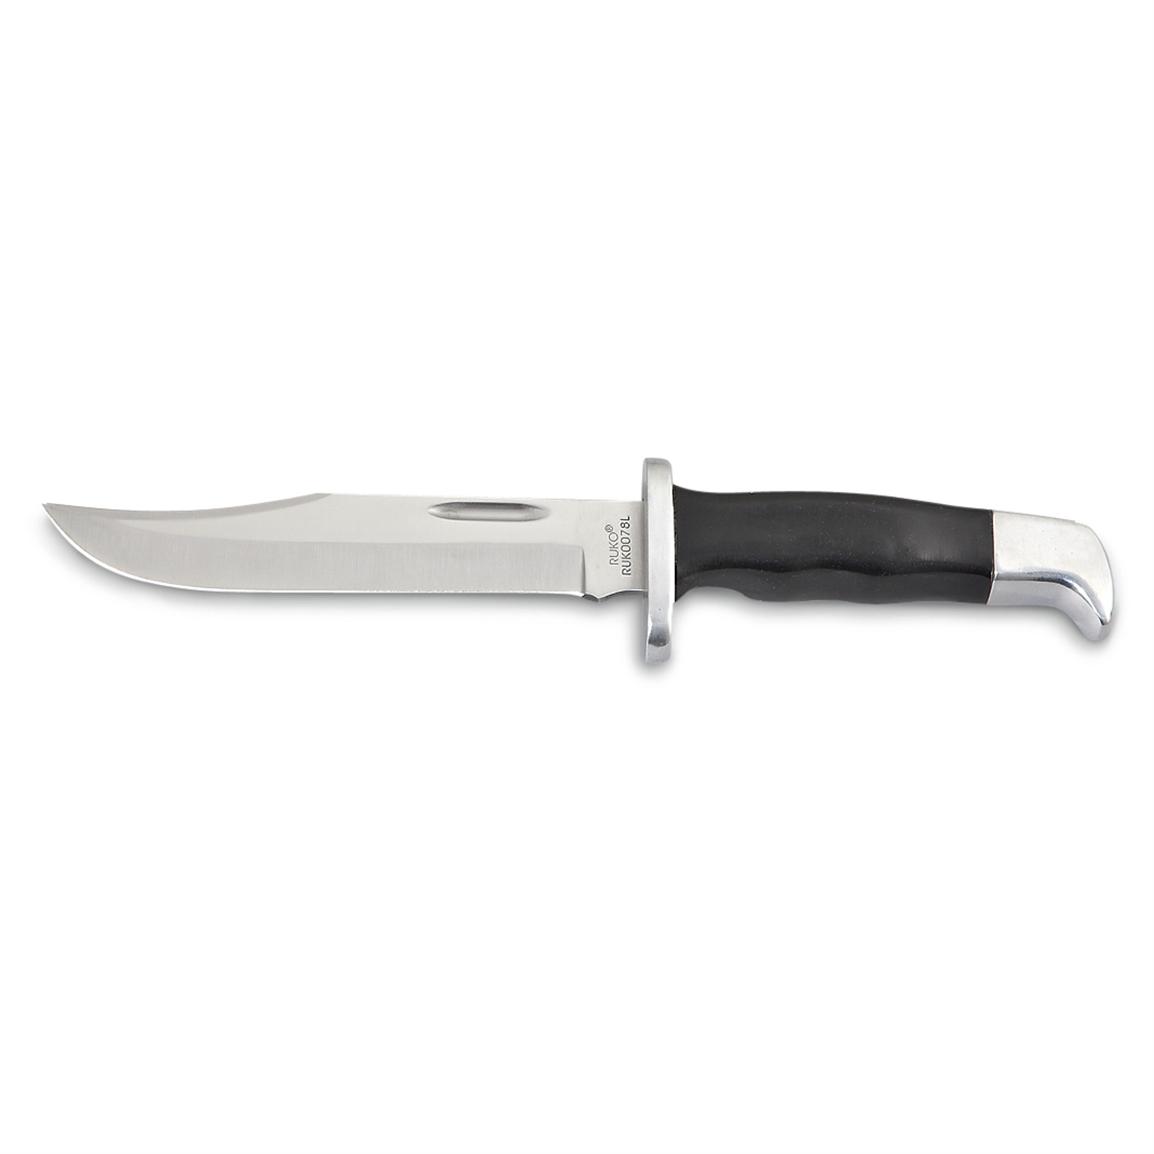 Ruko® Hunting Knife - 153208, Fixed Blade Knives at Sportsman's Guide